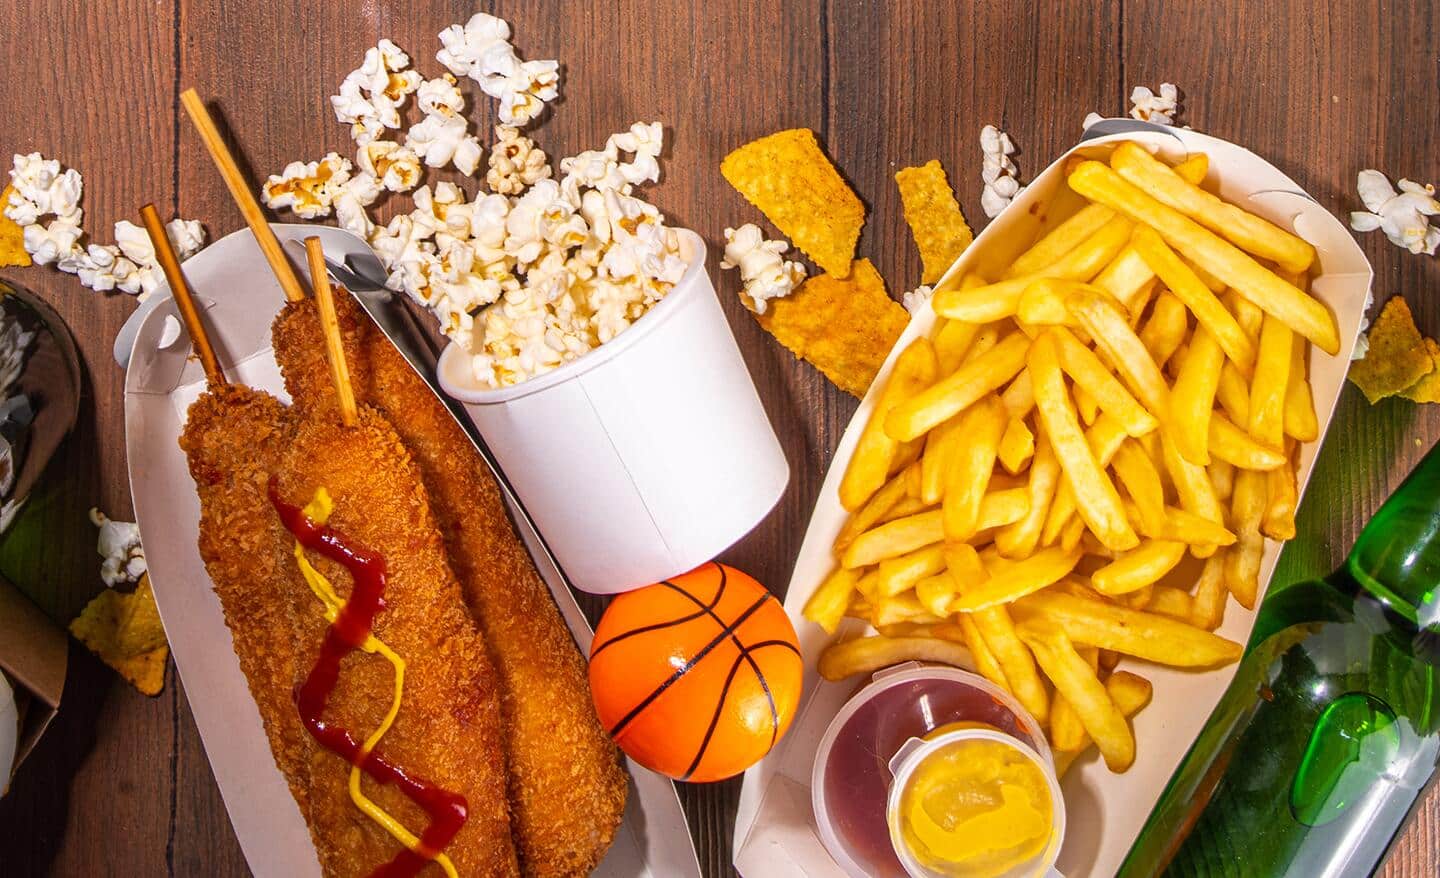 Basketball-inspired food spread of corn dogs, popcorn, fries and more.